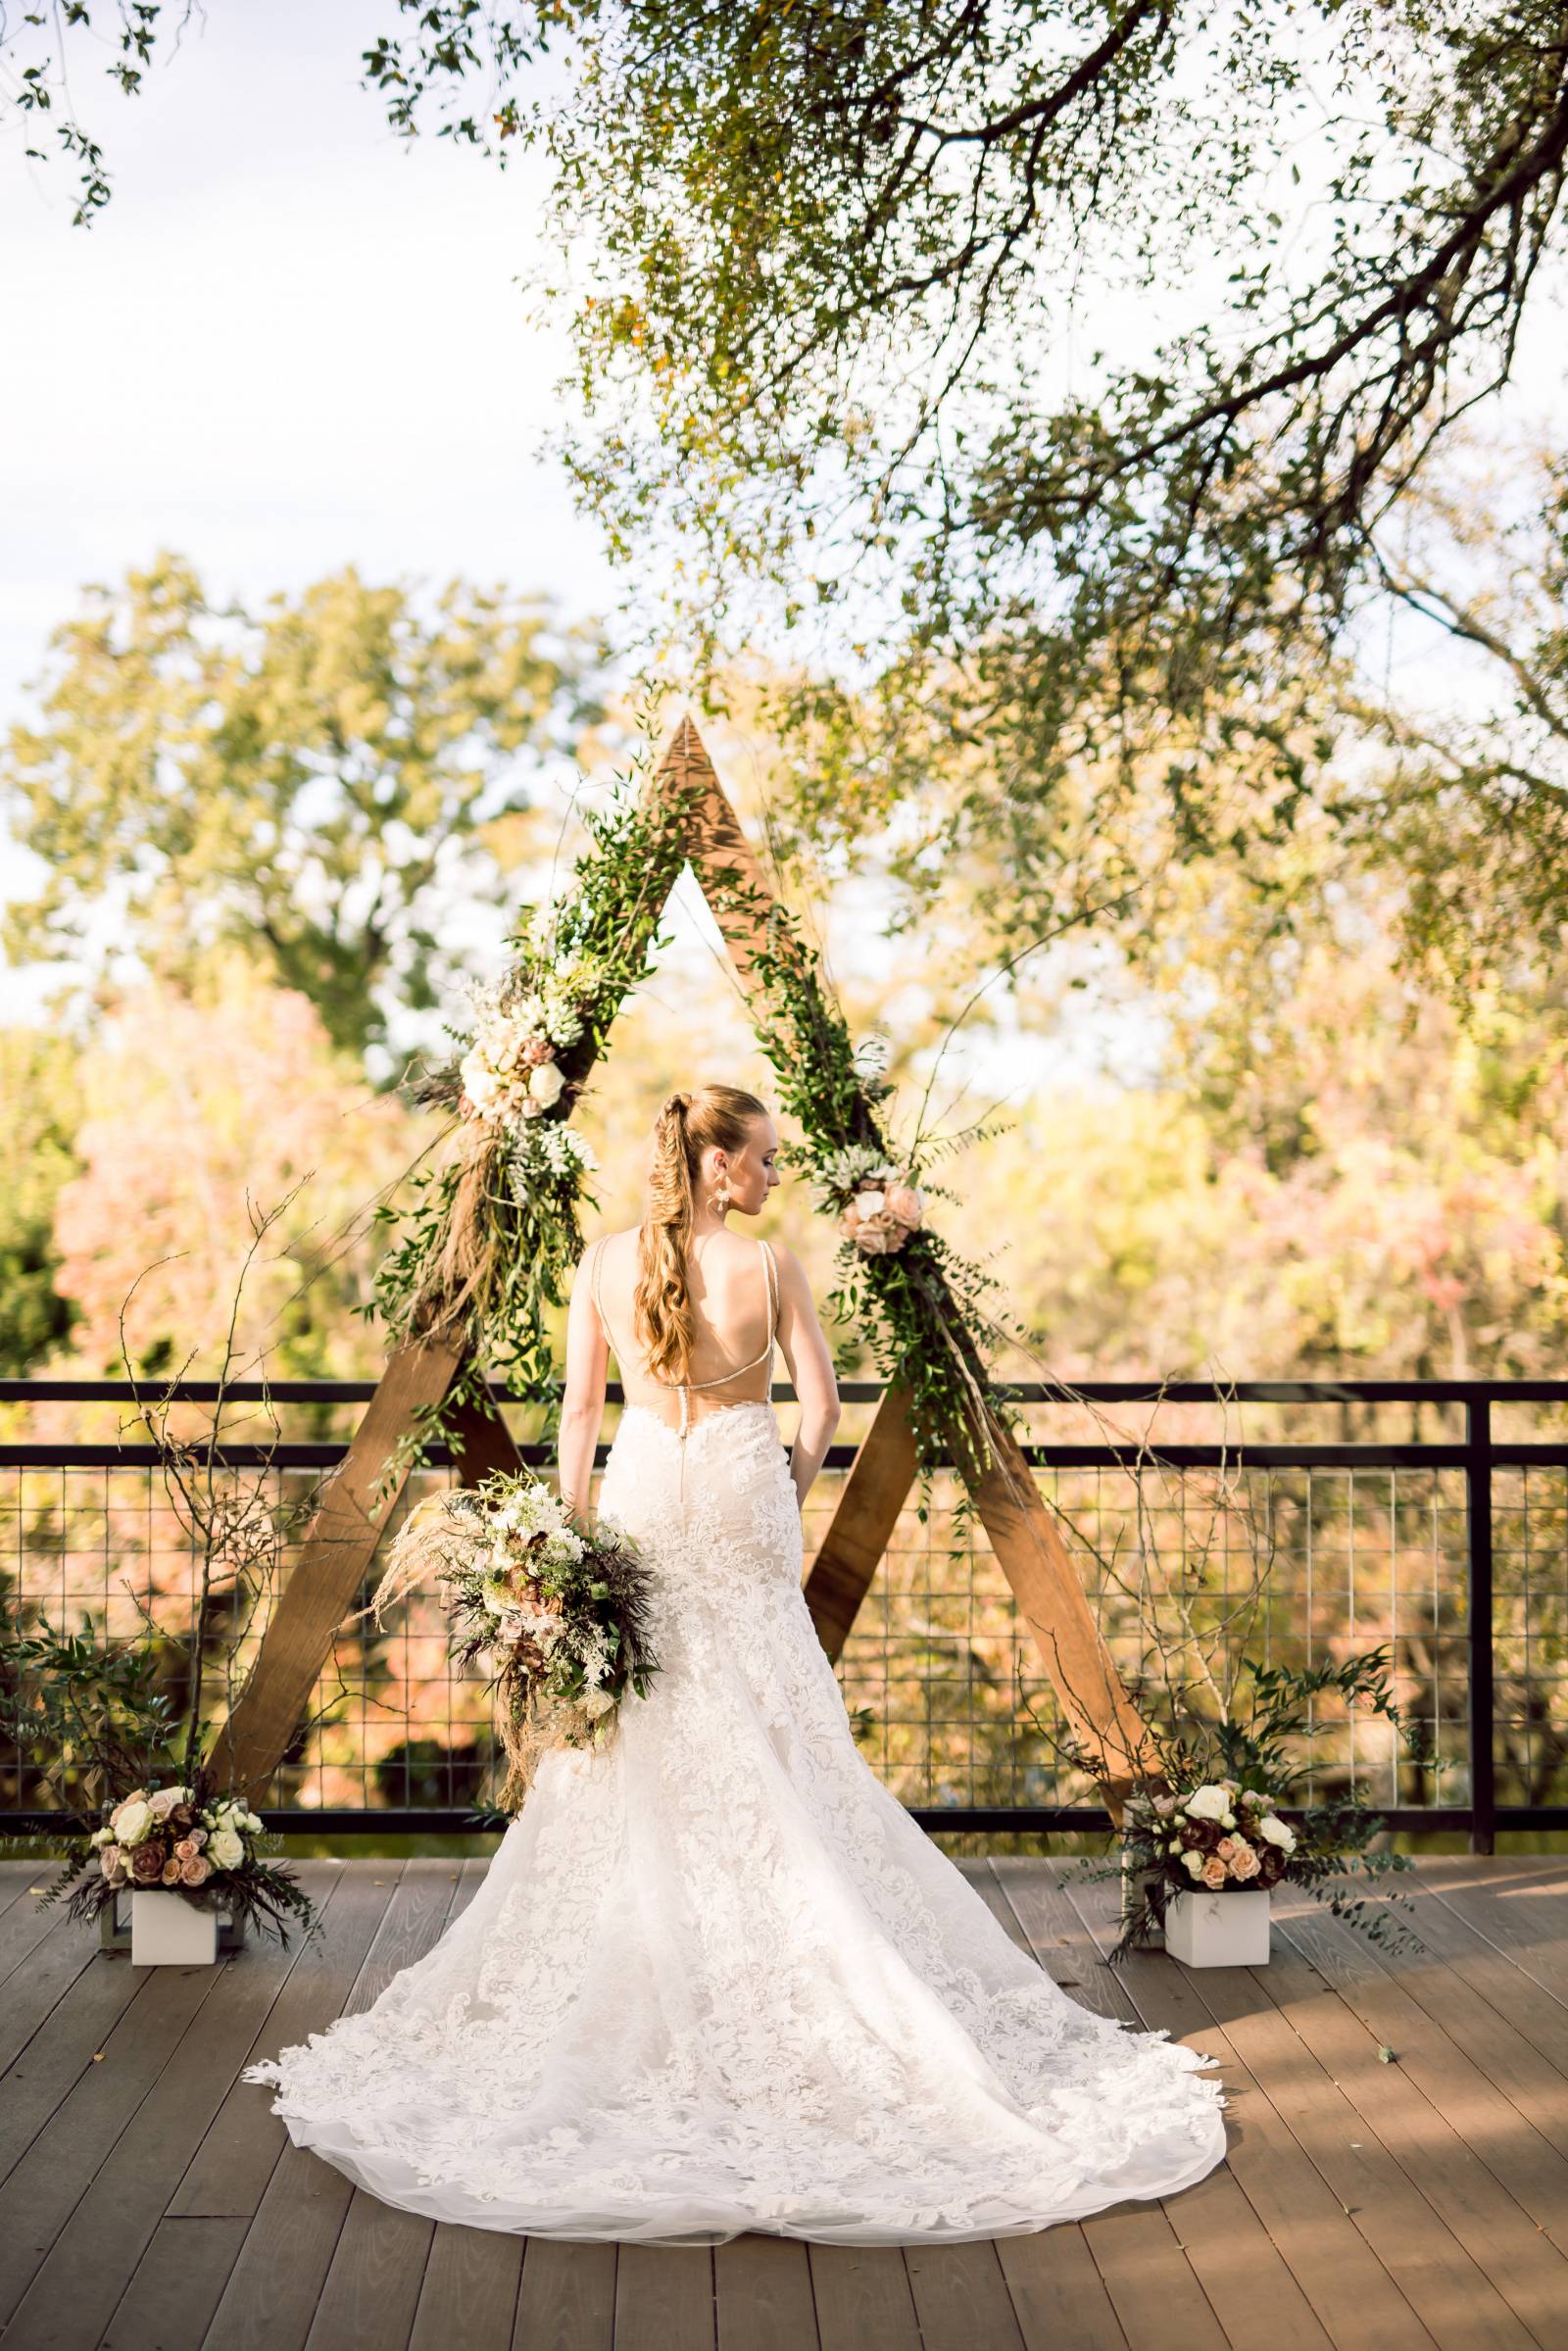 Ceremony arch with greenery